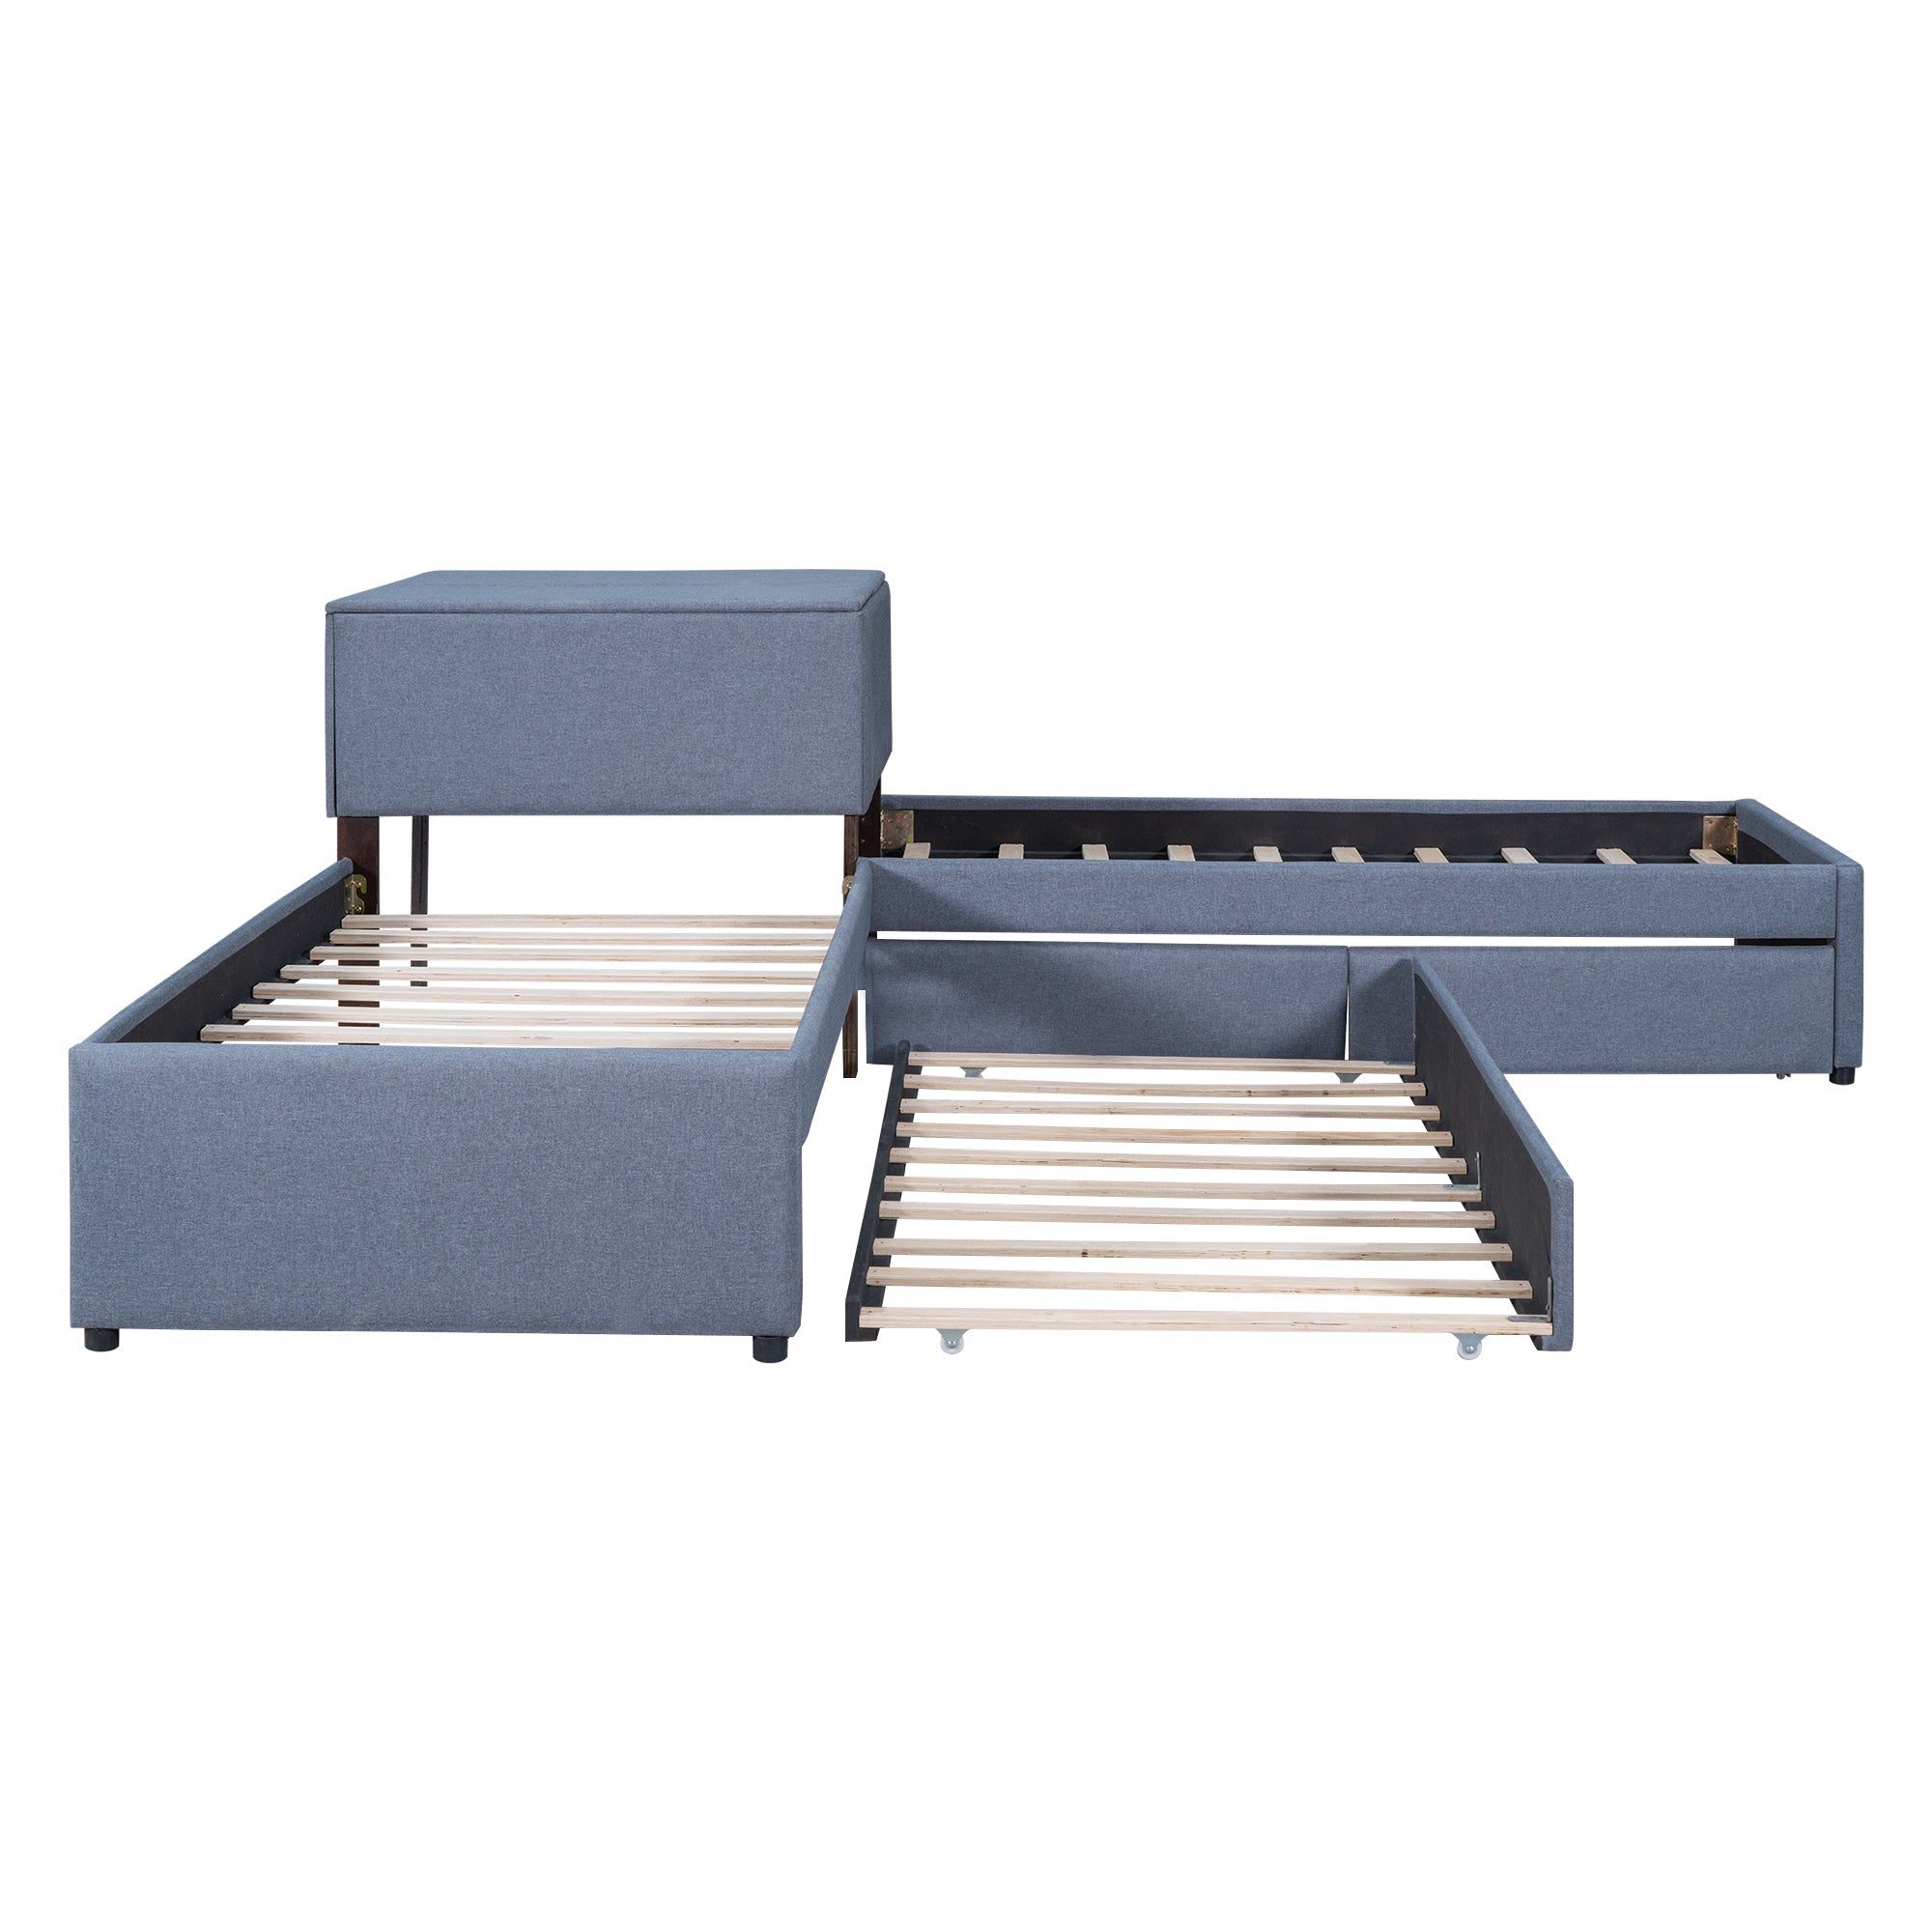 EUROCO Upholstery L-Shaped Twin Platform Bed with Storage Drawers and Trundle,Square Table for Kids Bedroom Gray